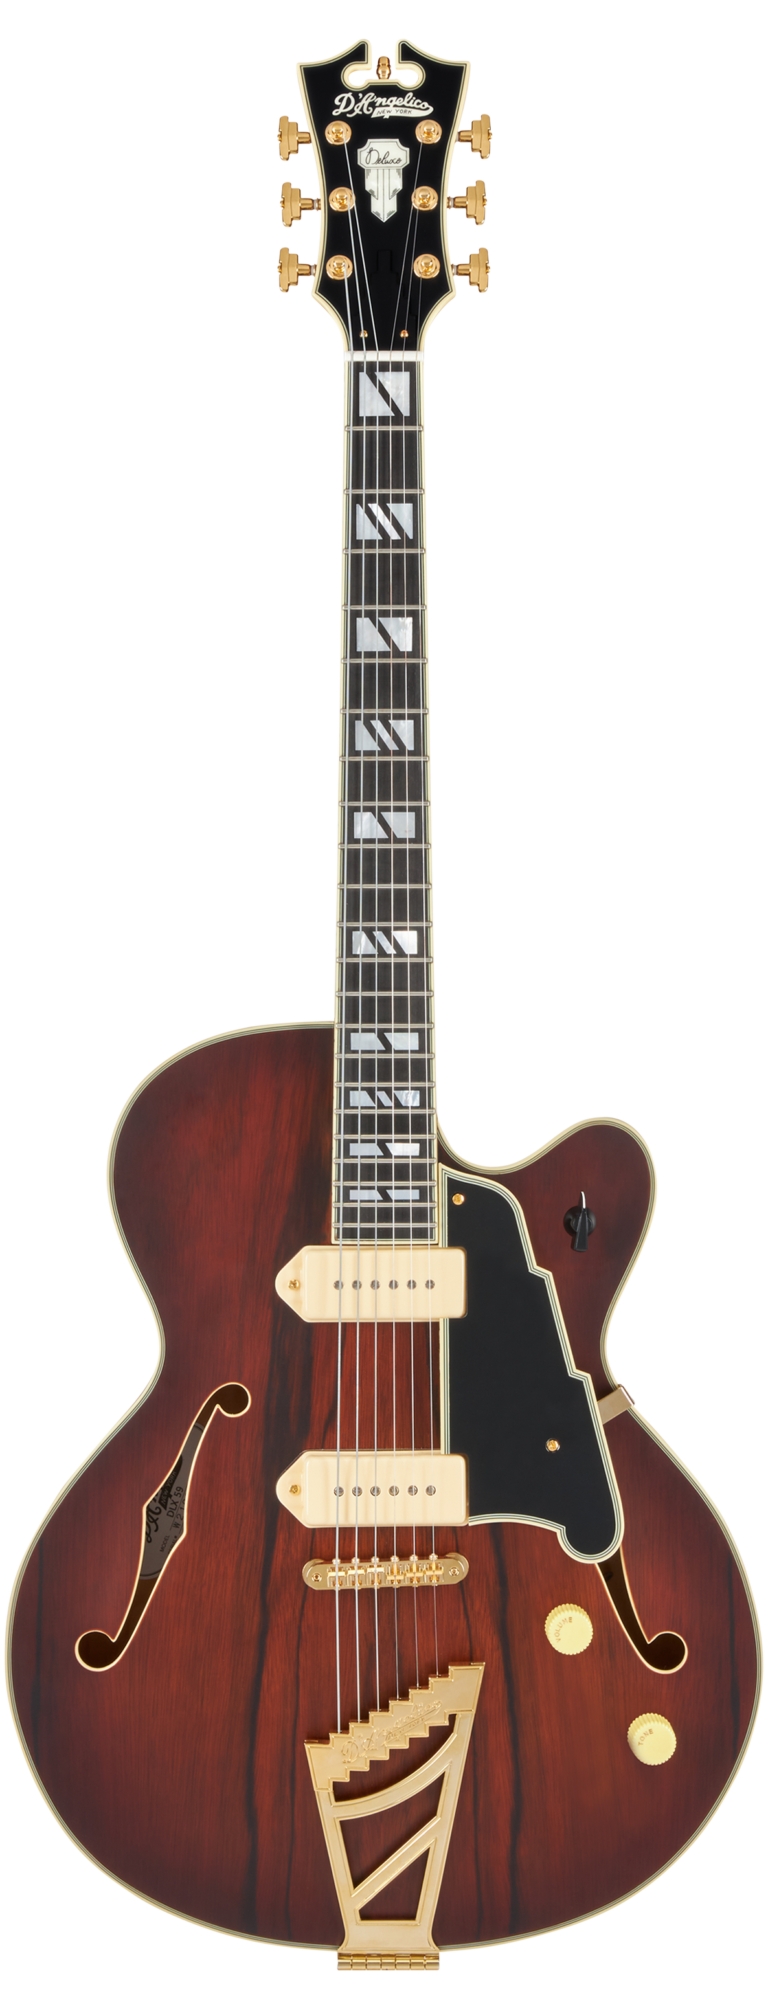 D'Angelico DELUXE 59 Hollow Body Electric Guitar (Satin Brown Burst)